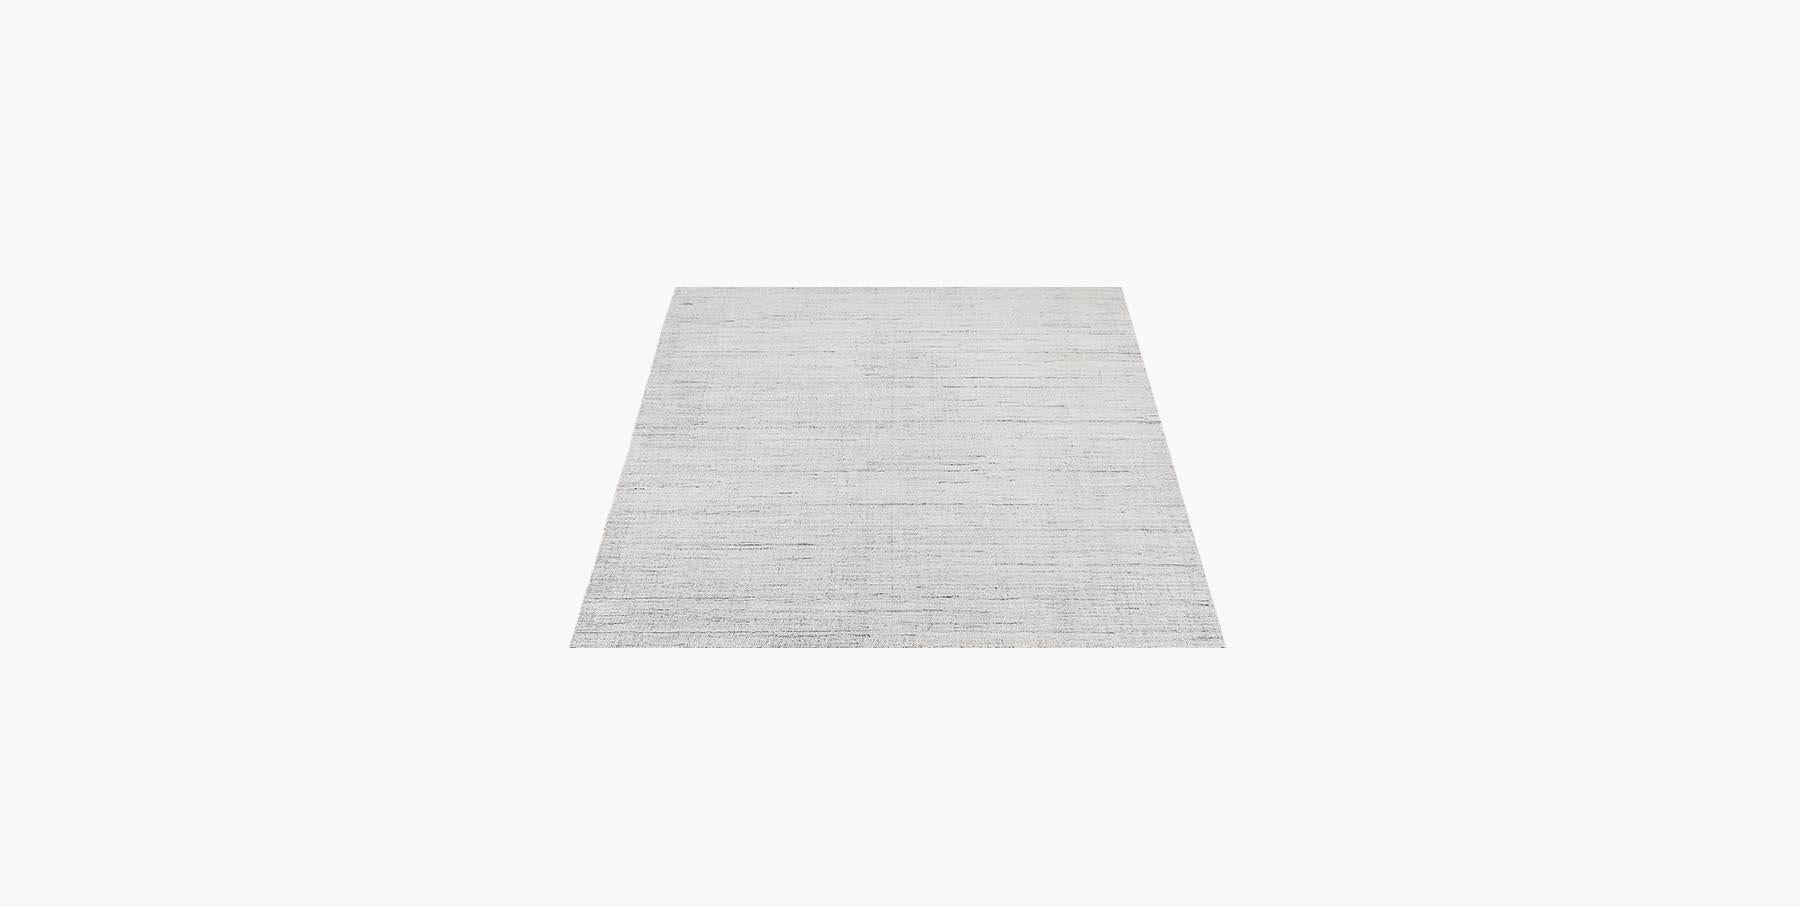 For Sale: Beige (Performance Distressed Natural) Ben Soleimani Performance Distressed Rug 9'x12' 2